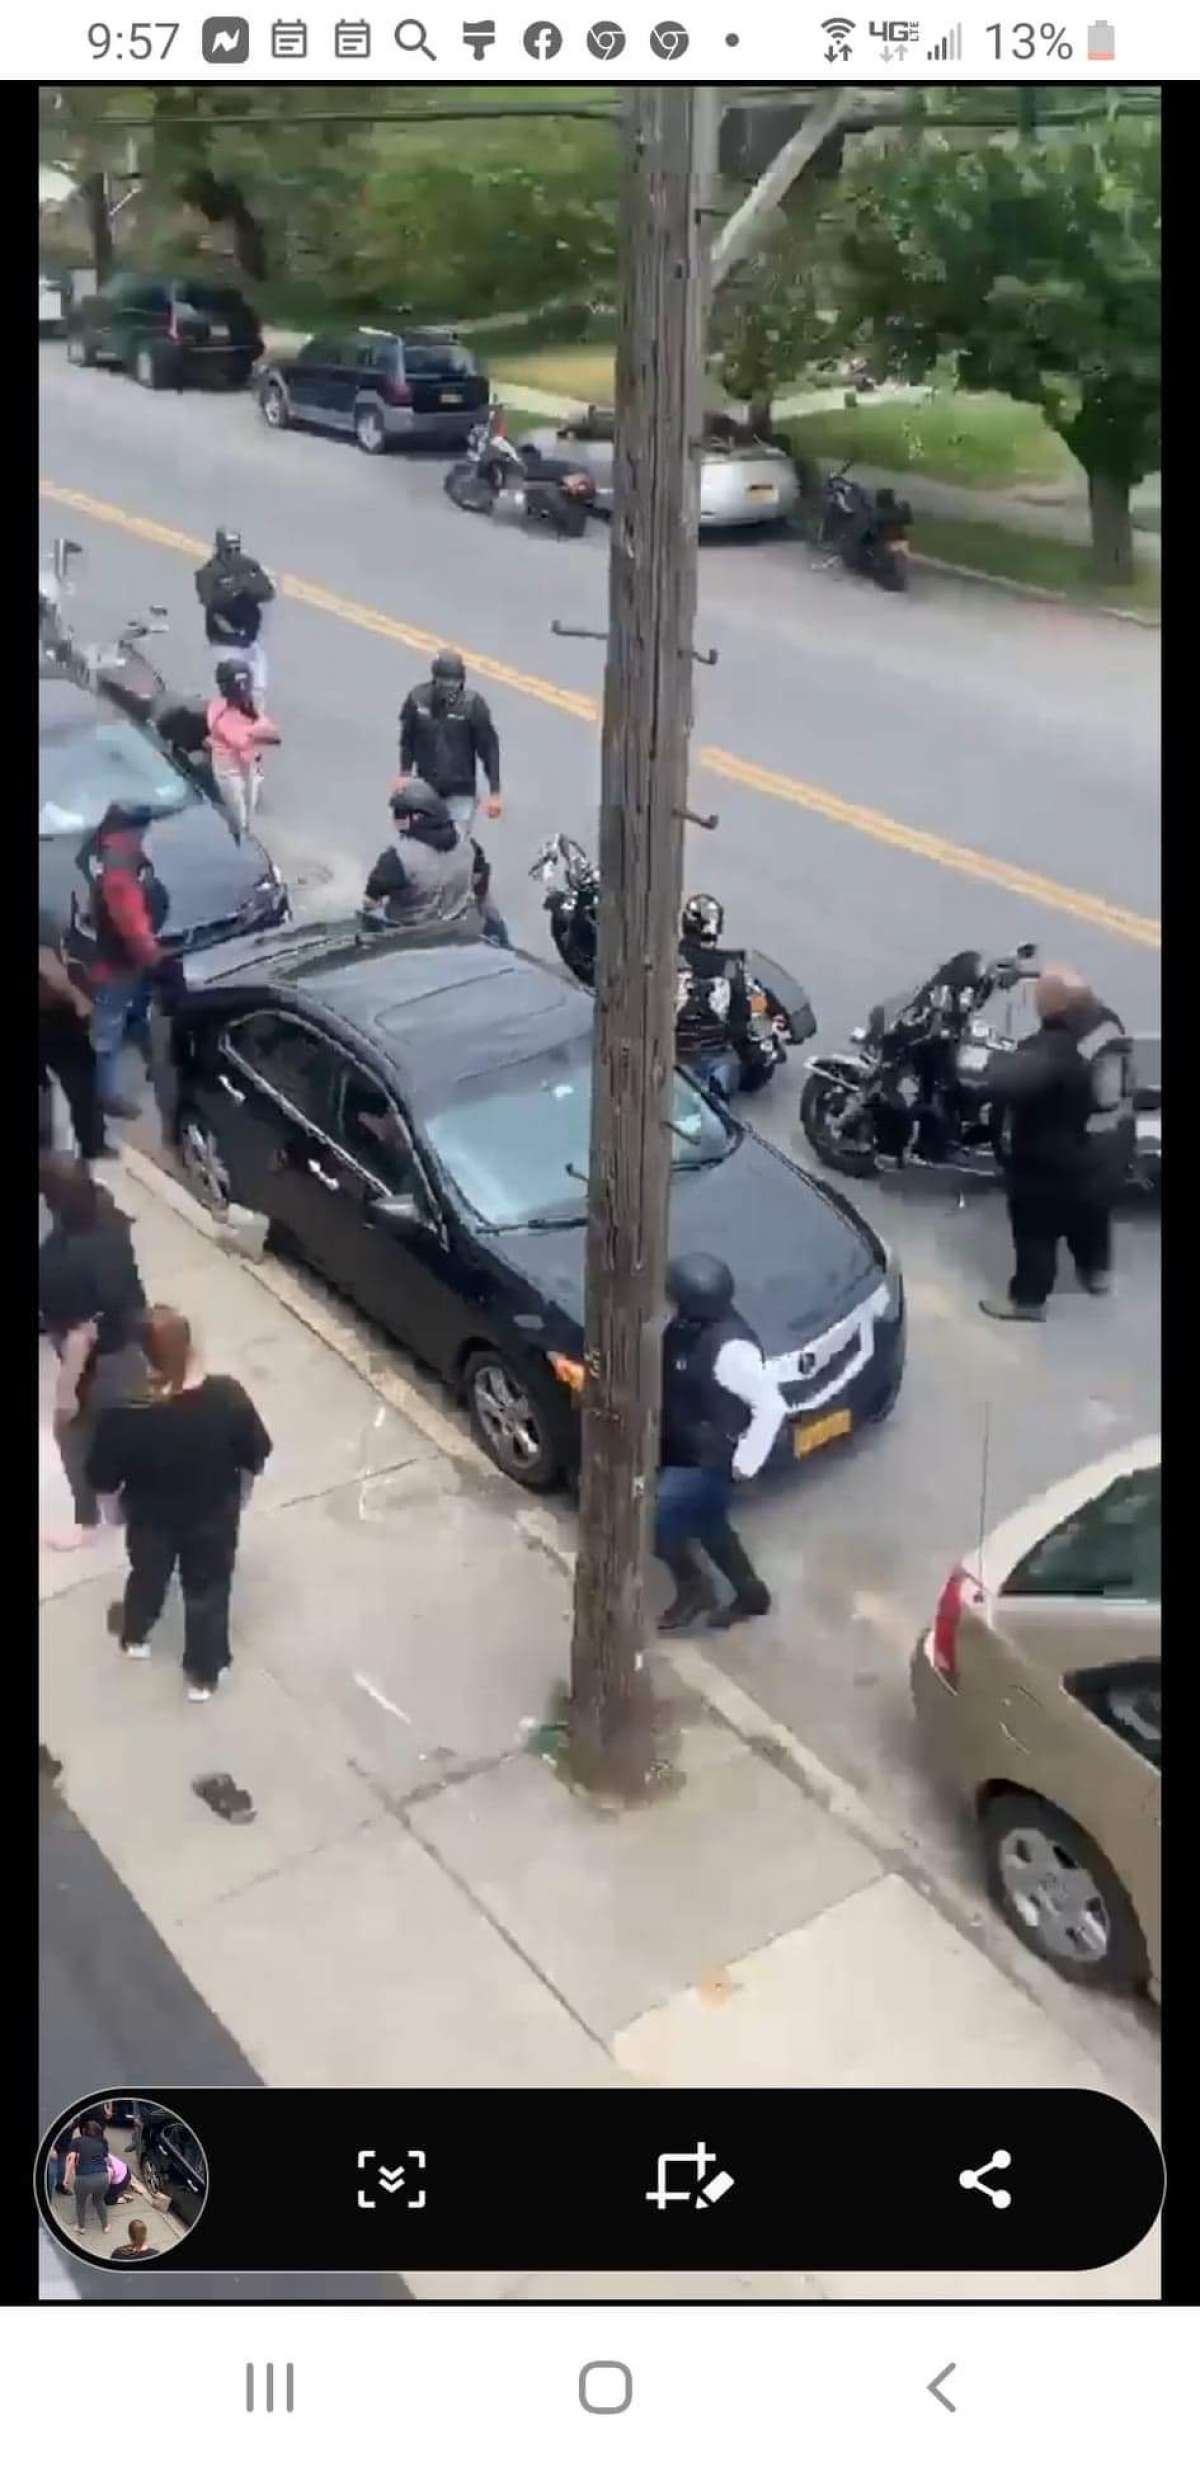 Joseph P. Brady, a longtime legislative aide to a Brooklyn assemblyman, is pictured at right in this undated photo, his arms crossed, as members of his motorcycle club, East Coast Syndicate, are involved in a brawl on a Troy street. (Provided photo)